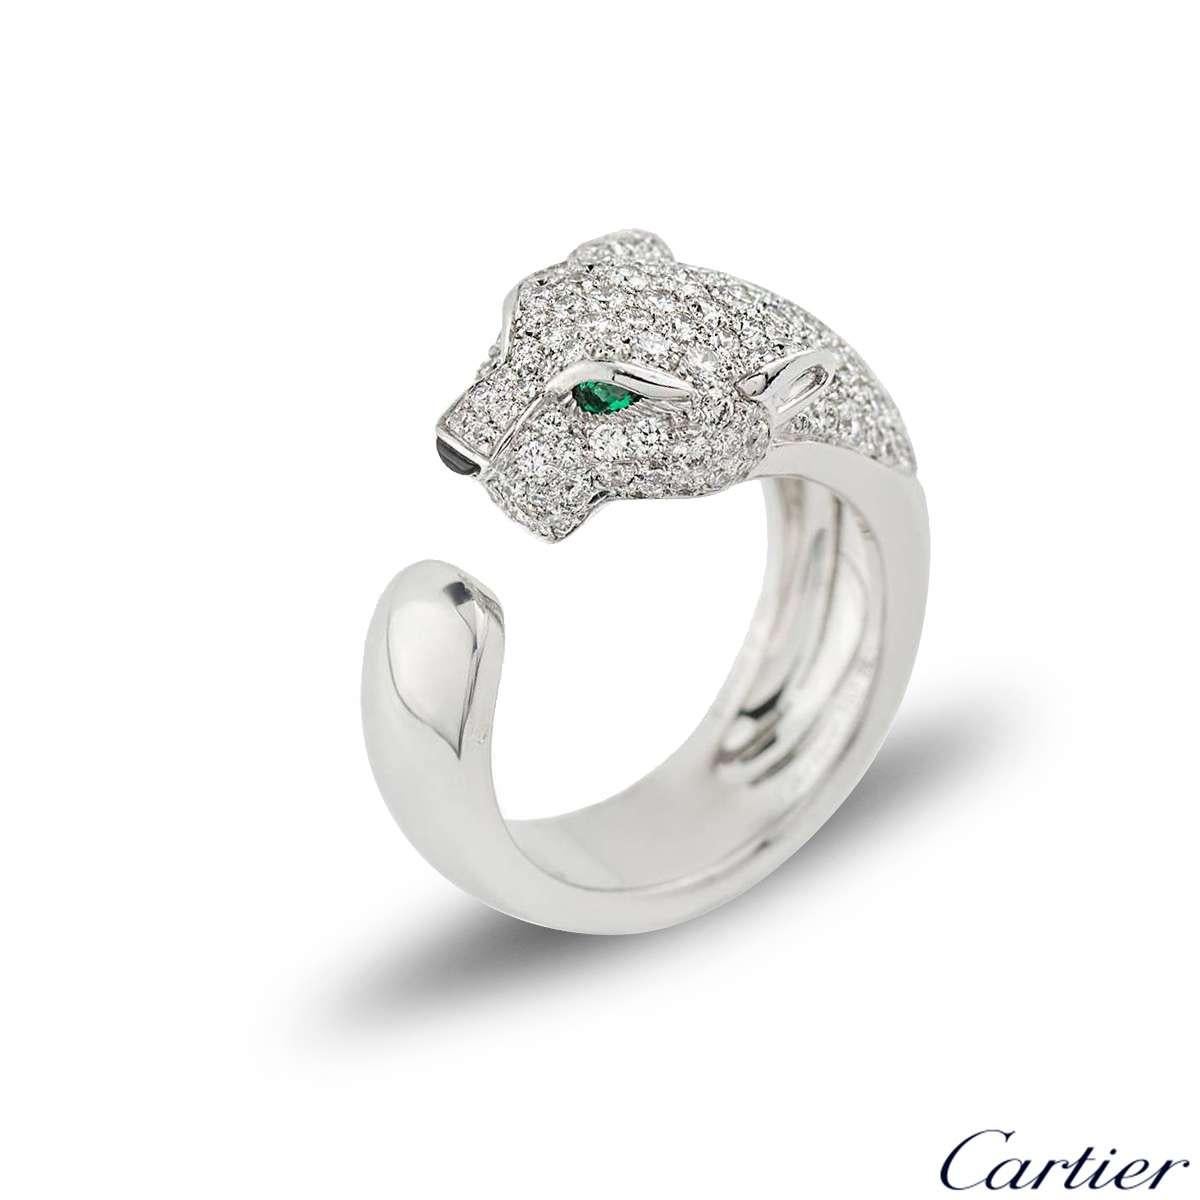 A stunning 18k white gold Cartier diamond, onyx and emerald ring from the Panthere De Cartier collection. The ring is composed of a Panthere head motif, pave set with 137 round brilliant cut diamonds totalling 1.15ct, accentuated by two emeralds set